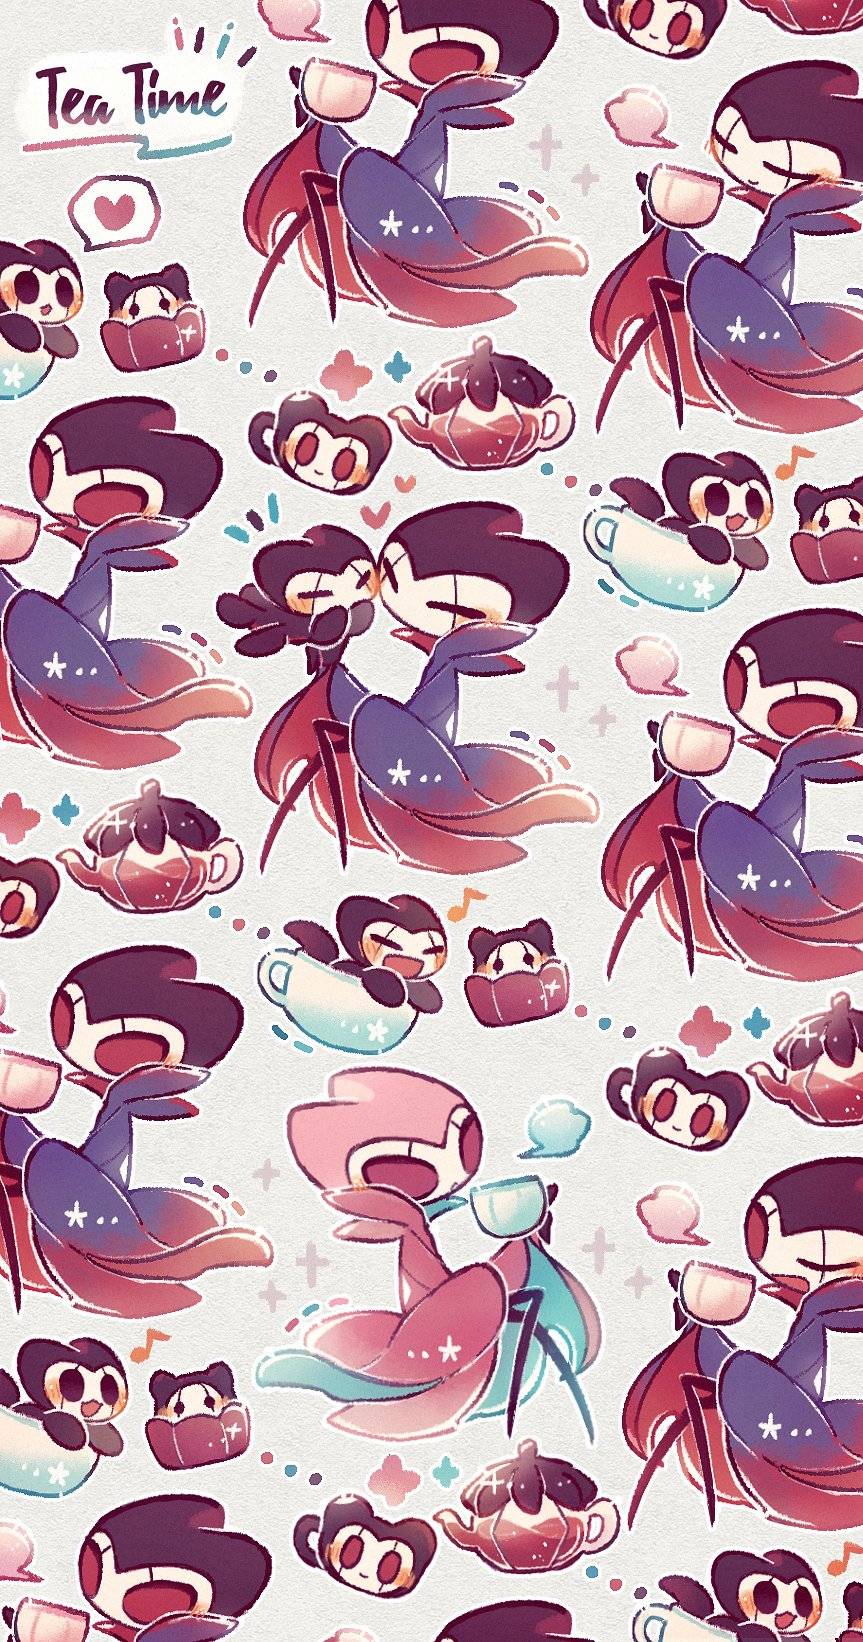 A pattern featuring characters from Hollow Knight 